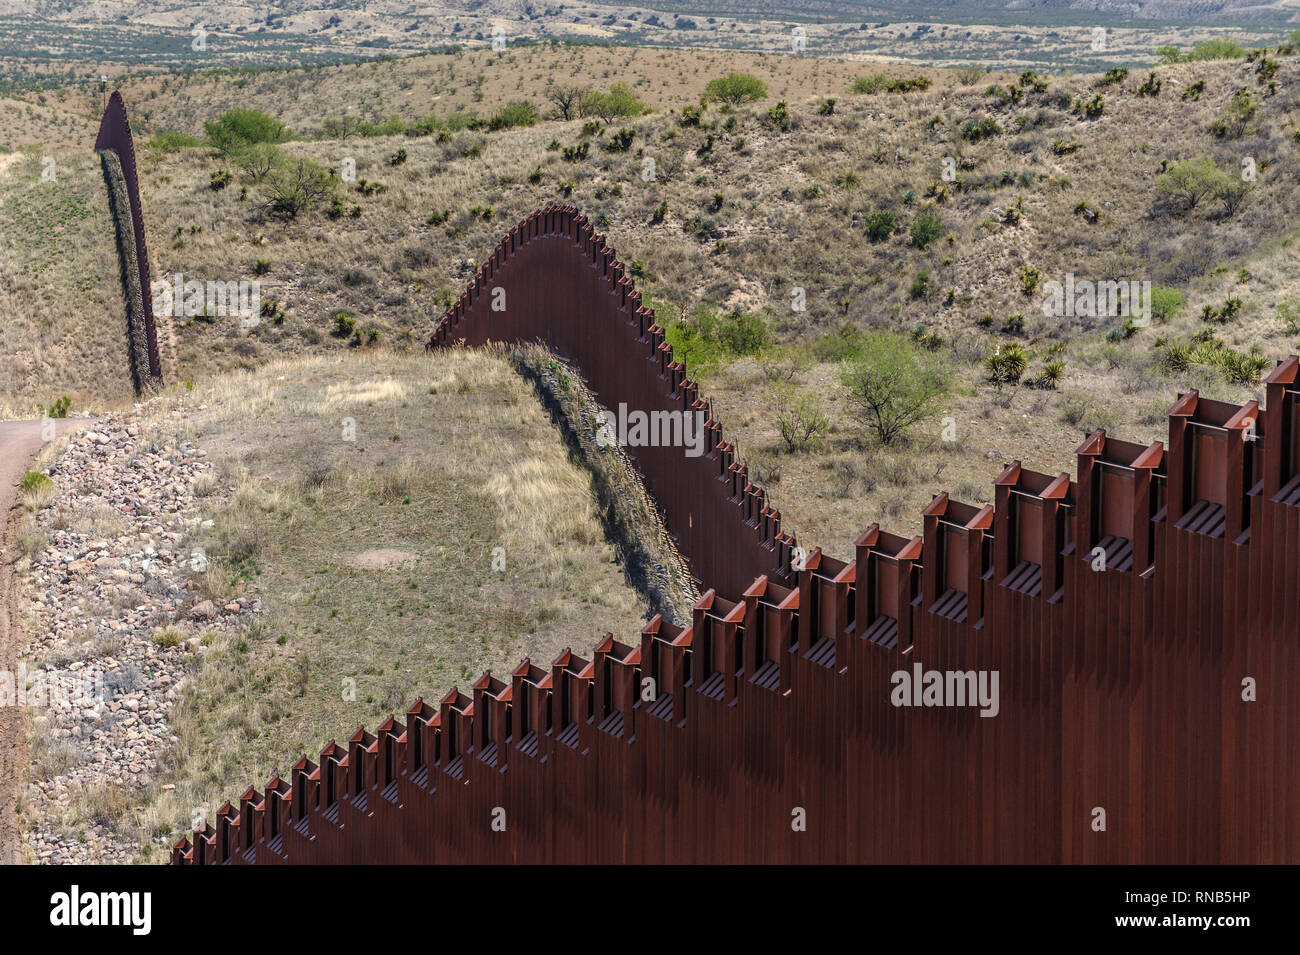 US border fence on Mexico boundary, bollard style pedestrian barrier, viewed from US side, remote hilly terrain, east of Nogales Arizona, April 2018 Stock Photo